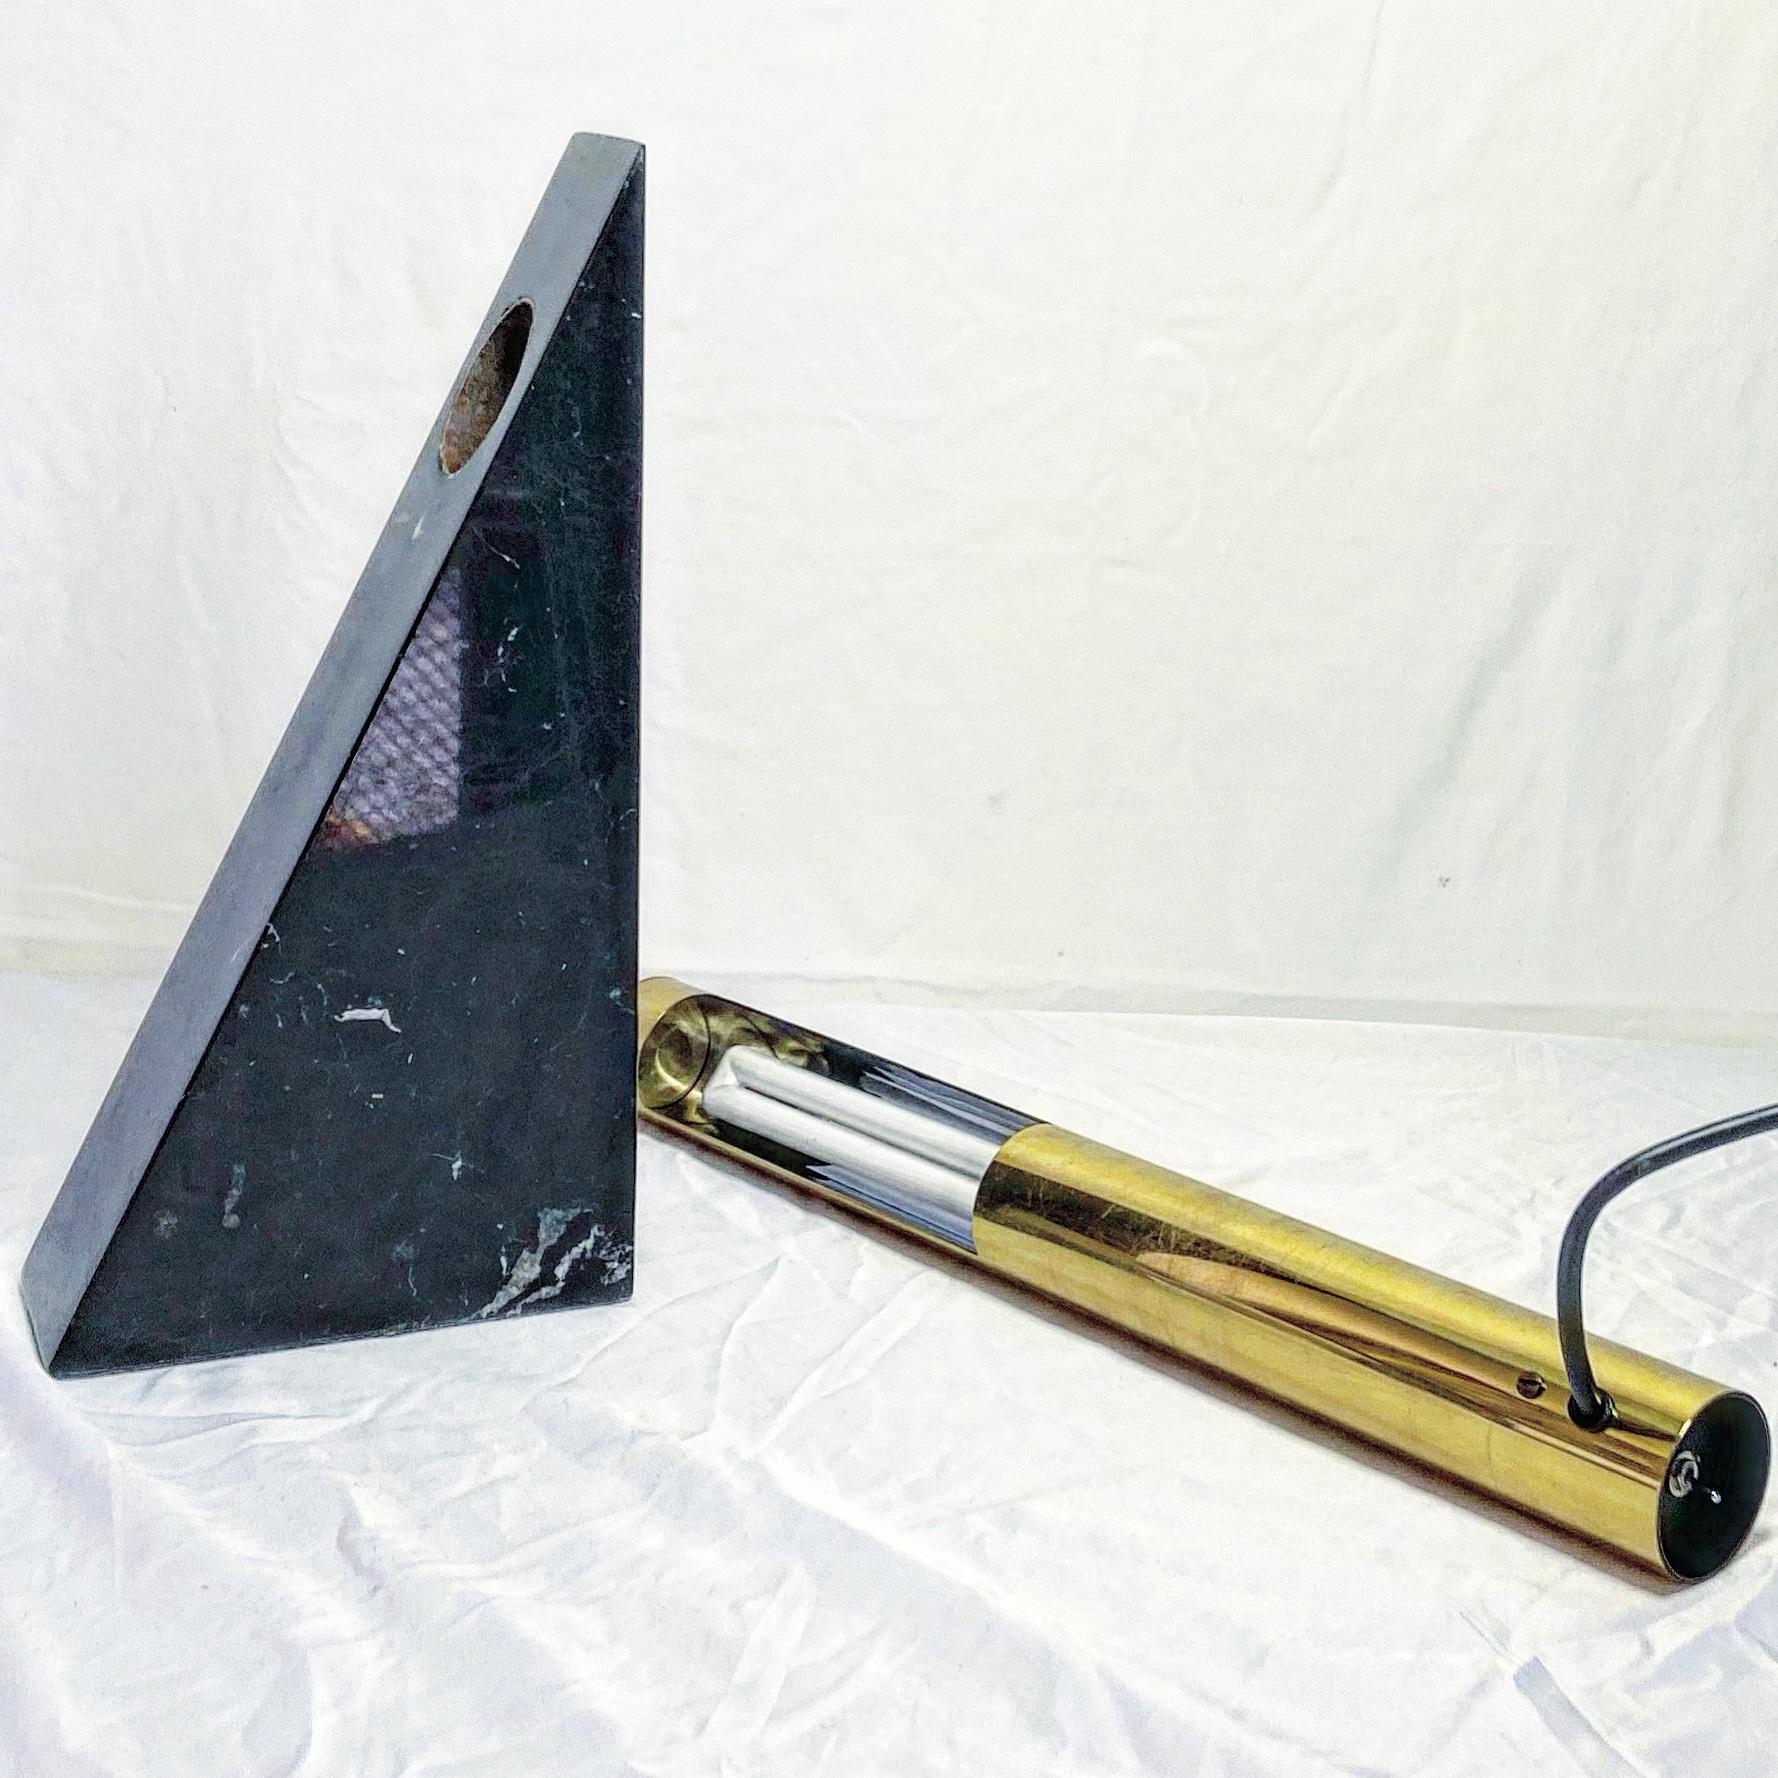 Stylish Art Deco triangular marble with detachable brass tube shaped lamp.
Has a small crack towards bottom as can be seen in photos.
In excellent working condition.

Additional information:
Materials: Brass, Marble
Color: Black, Brass
Style: Art